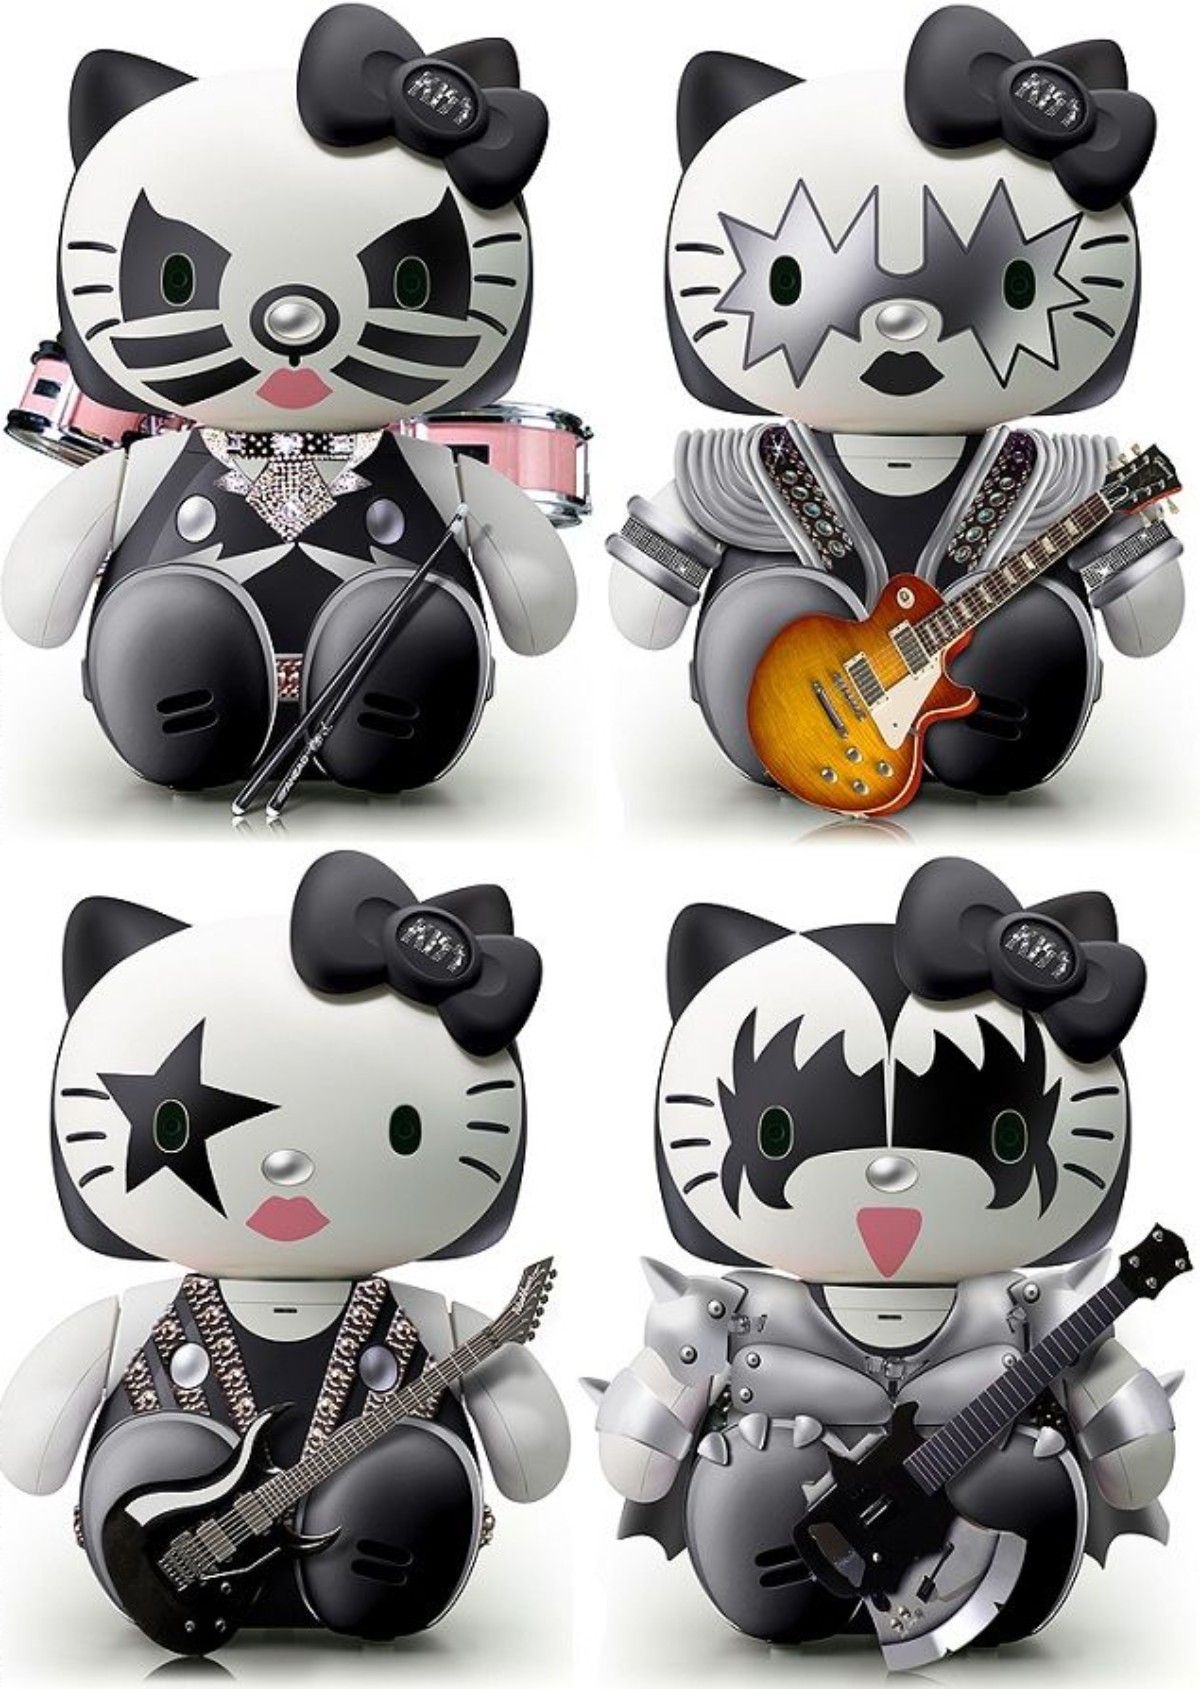 Hello Kitty in KISS style